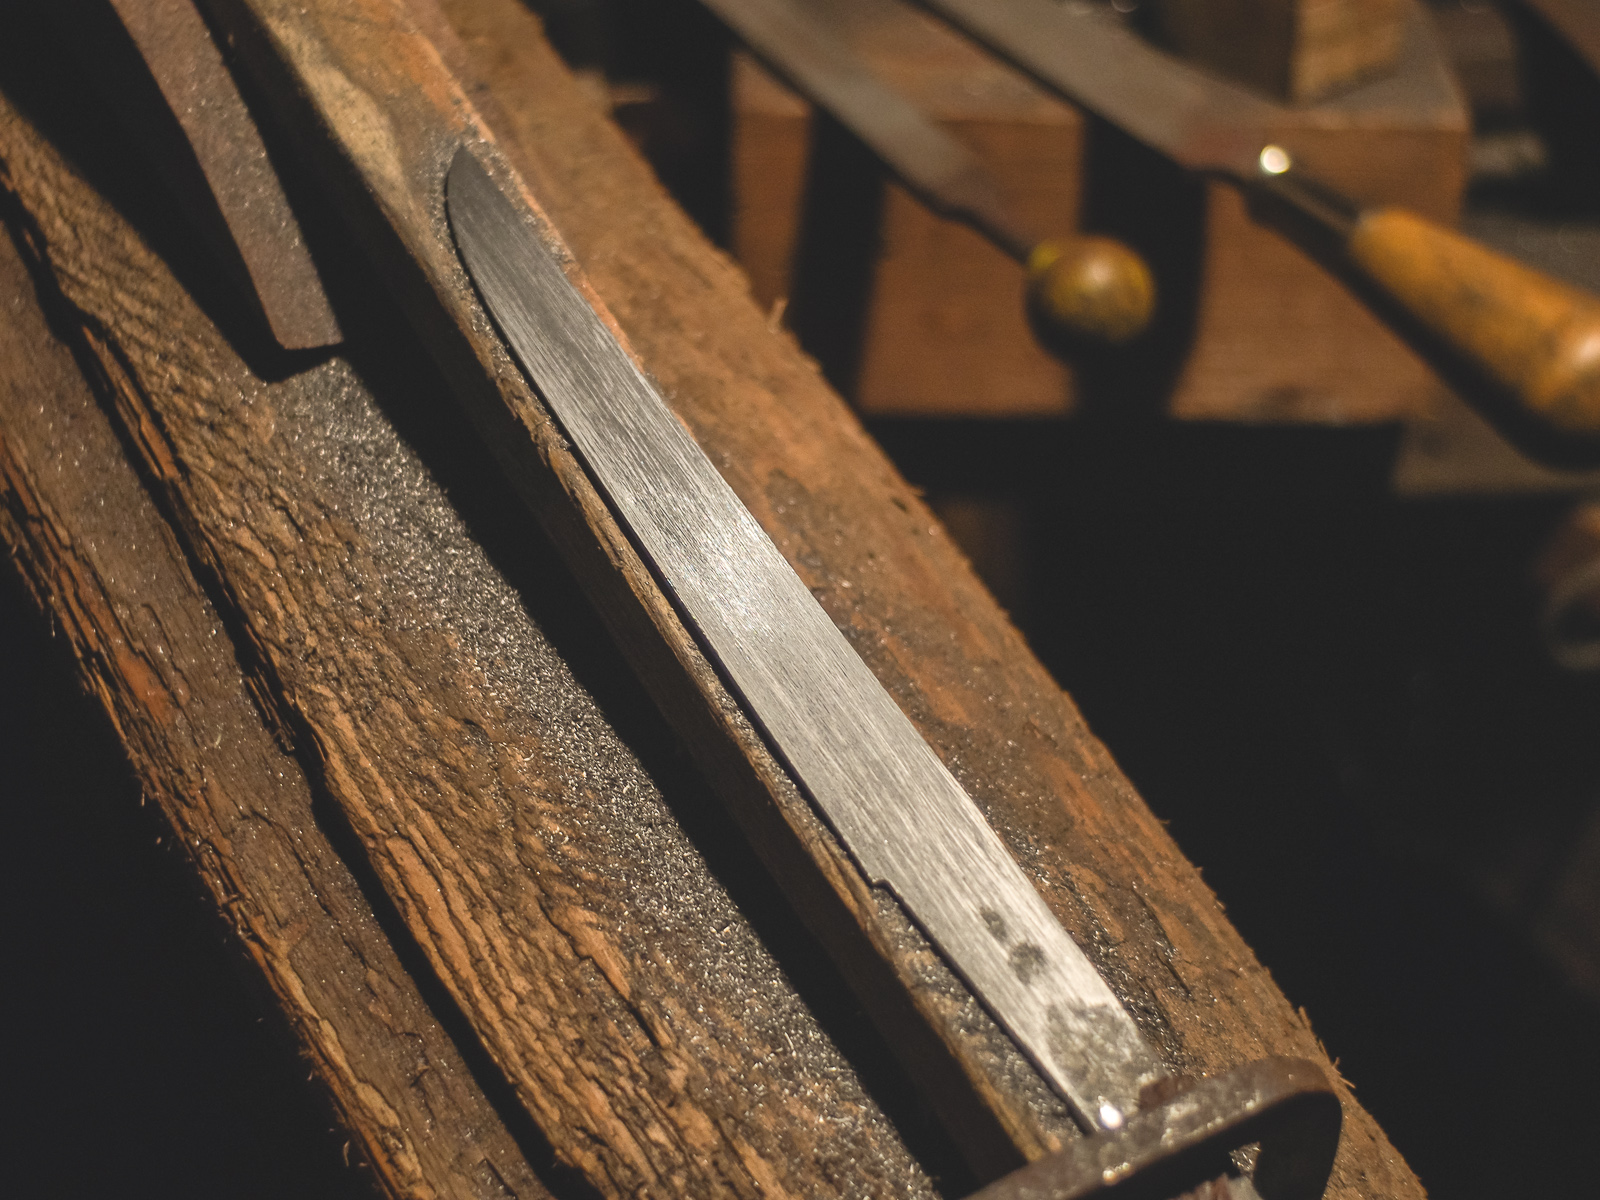 Island Blacksmith: Hand forged yoroidoshi tanto in shirasaya, made from reclaimed and natural materials using traditional techniques